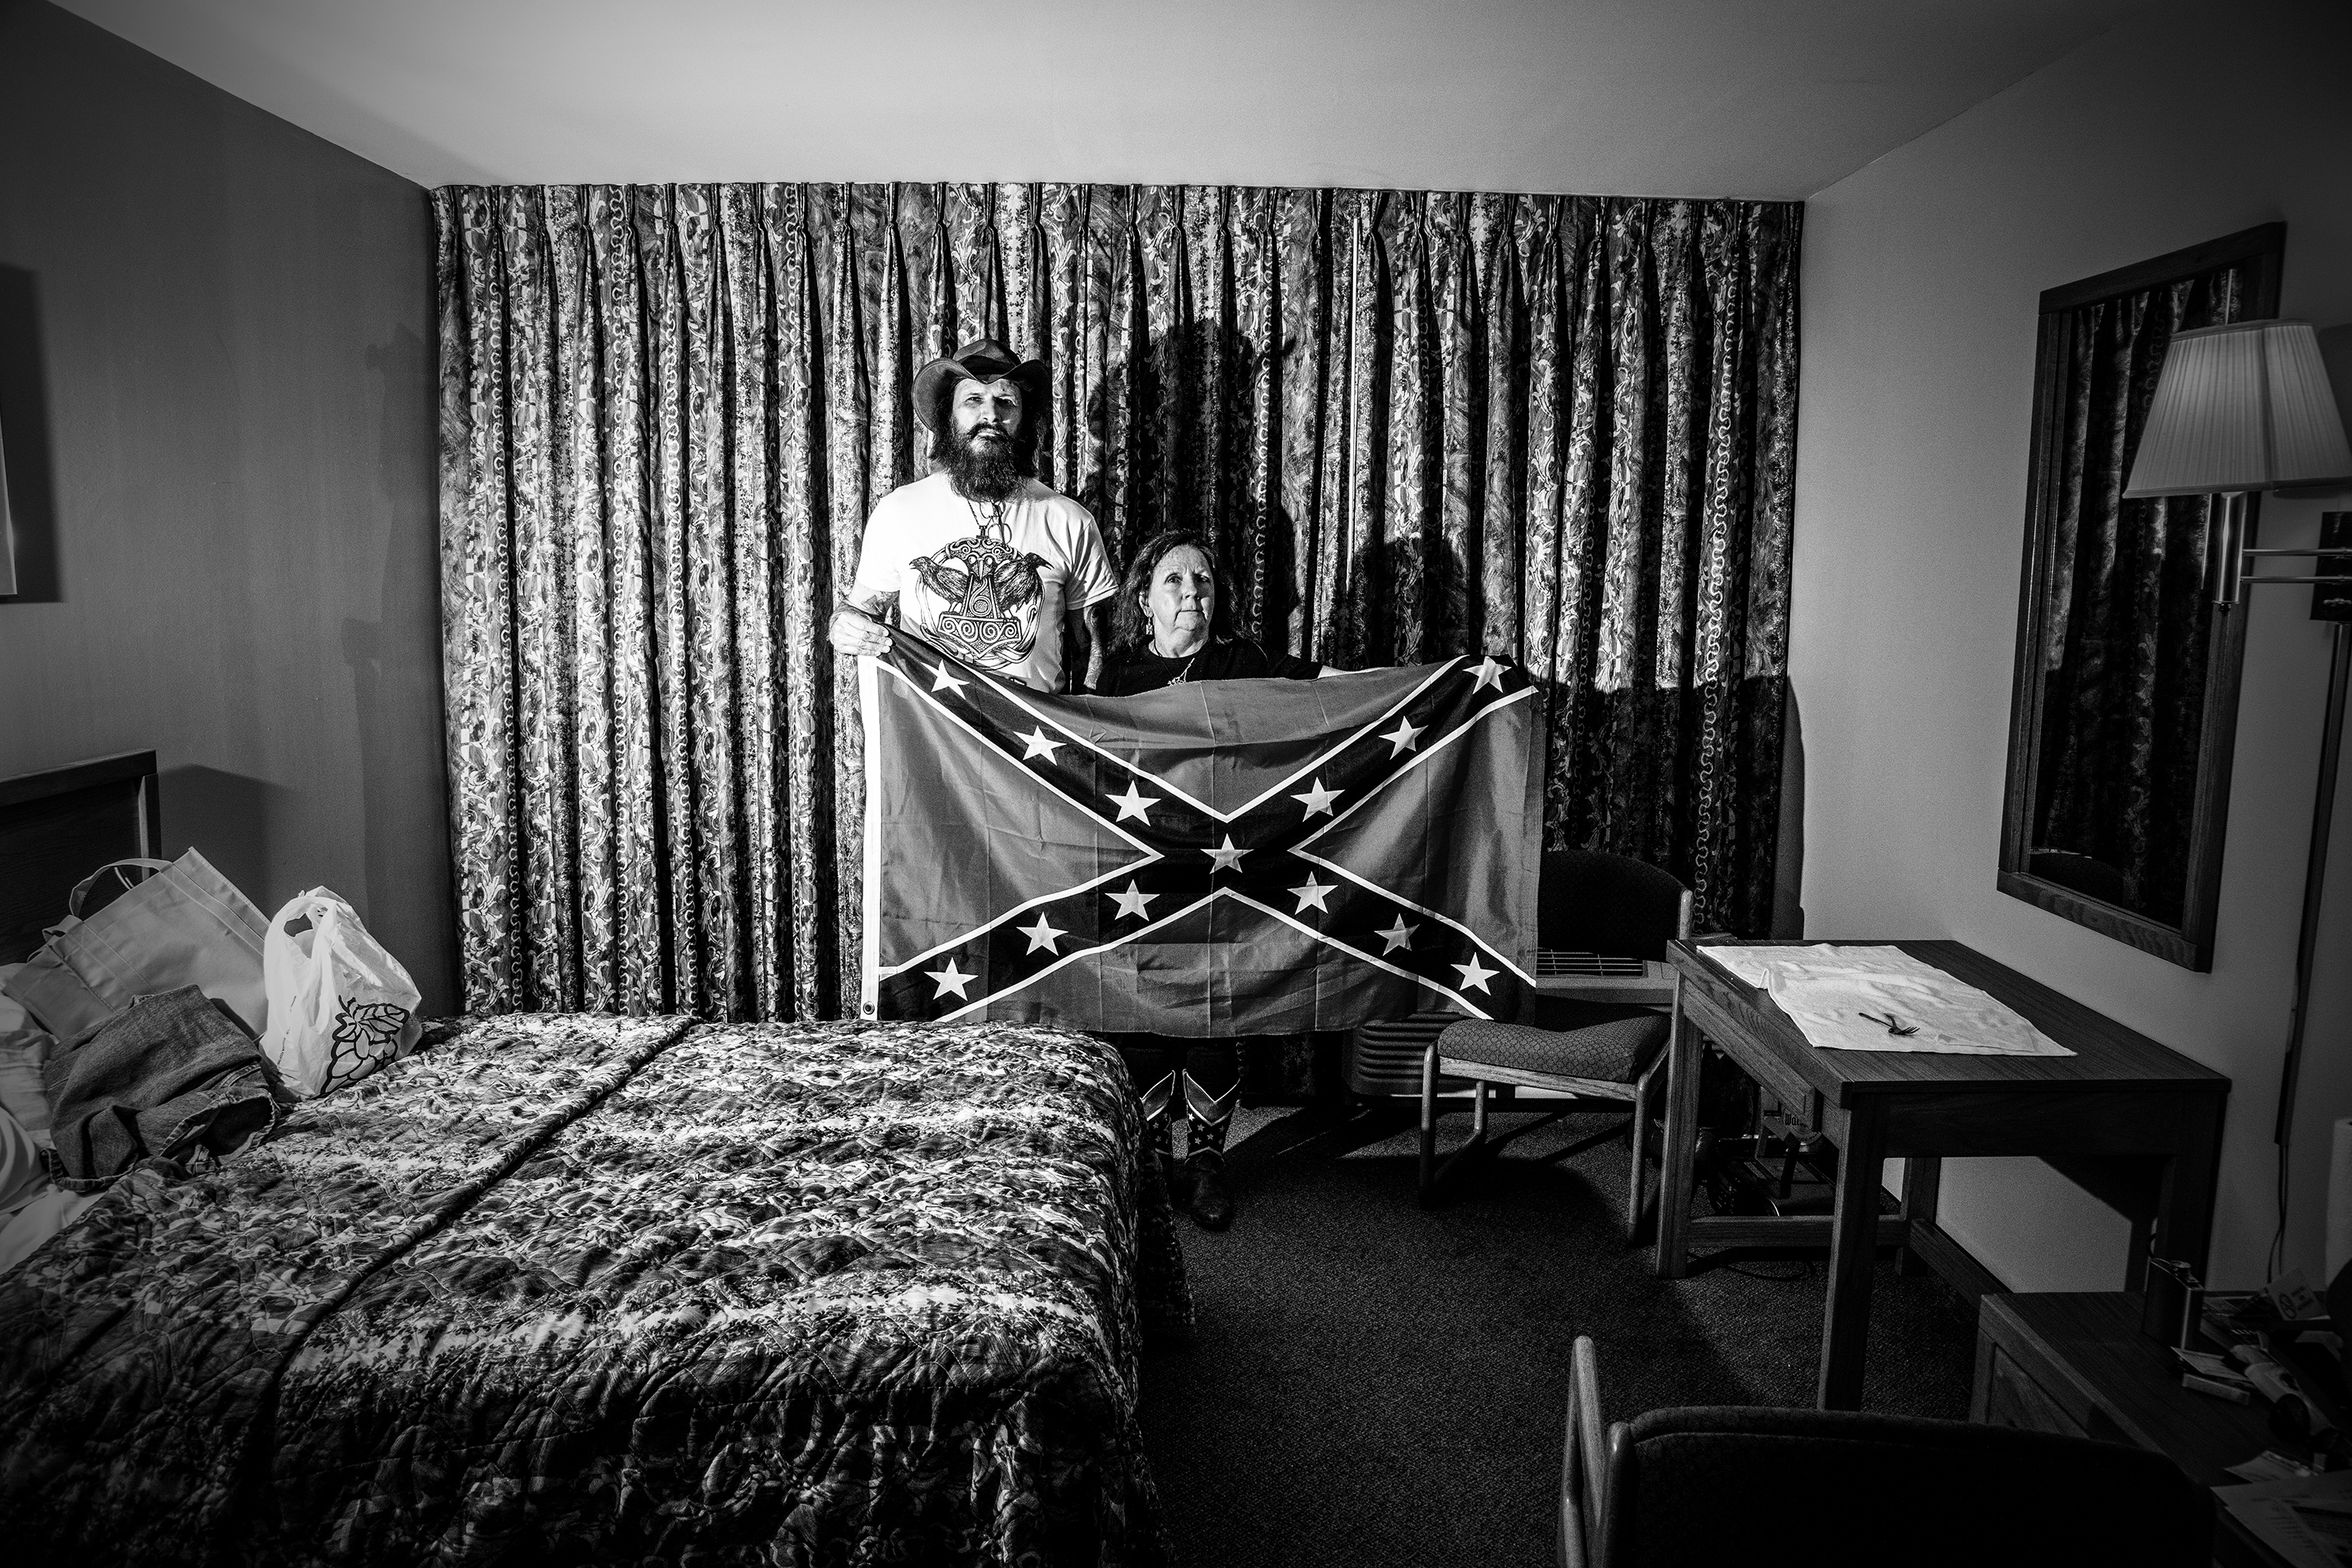 Mr. and Mrs. McDonald pose with a Confederate flag in their hotel room while attending the American Freedom Party and Council of Conservative Citizens conference in Nashville, a conference attended by white nationalist supporters and white supremacists, on June 16, 2018. (Mark Peterson—Redux)